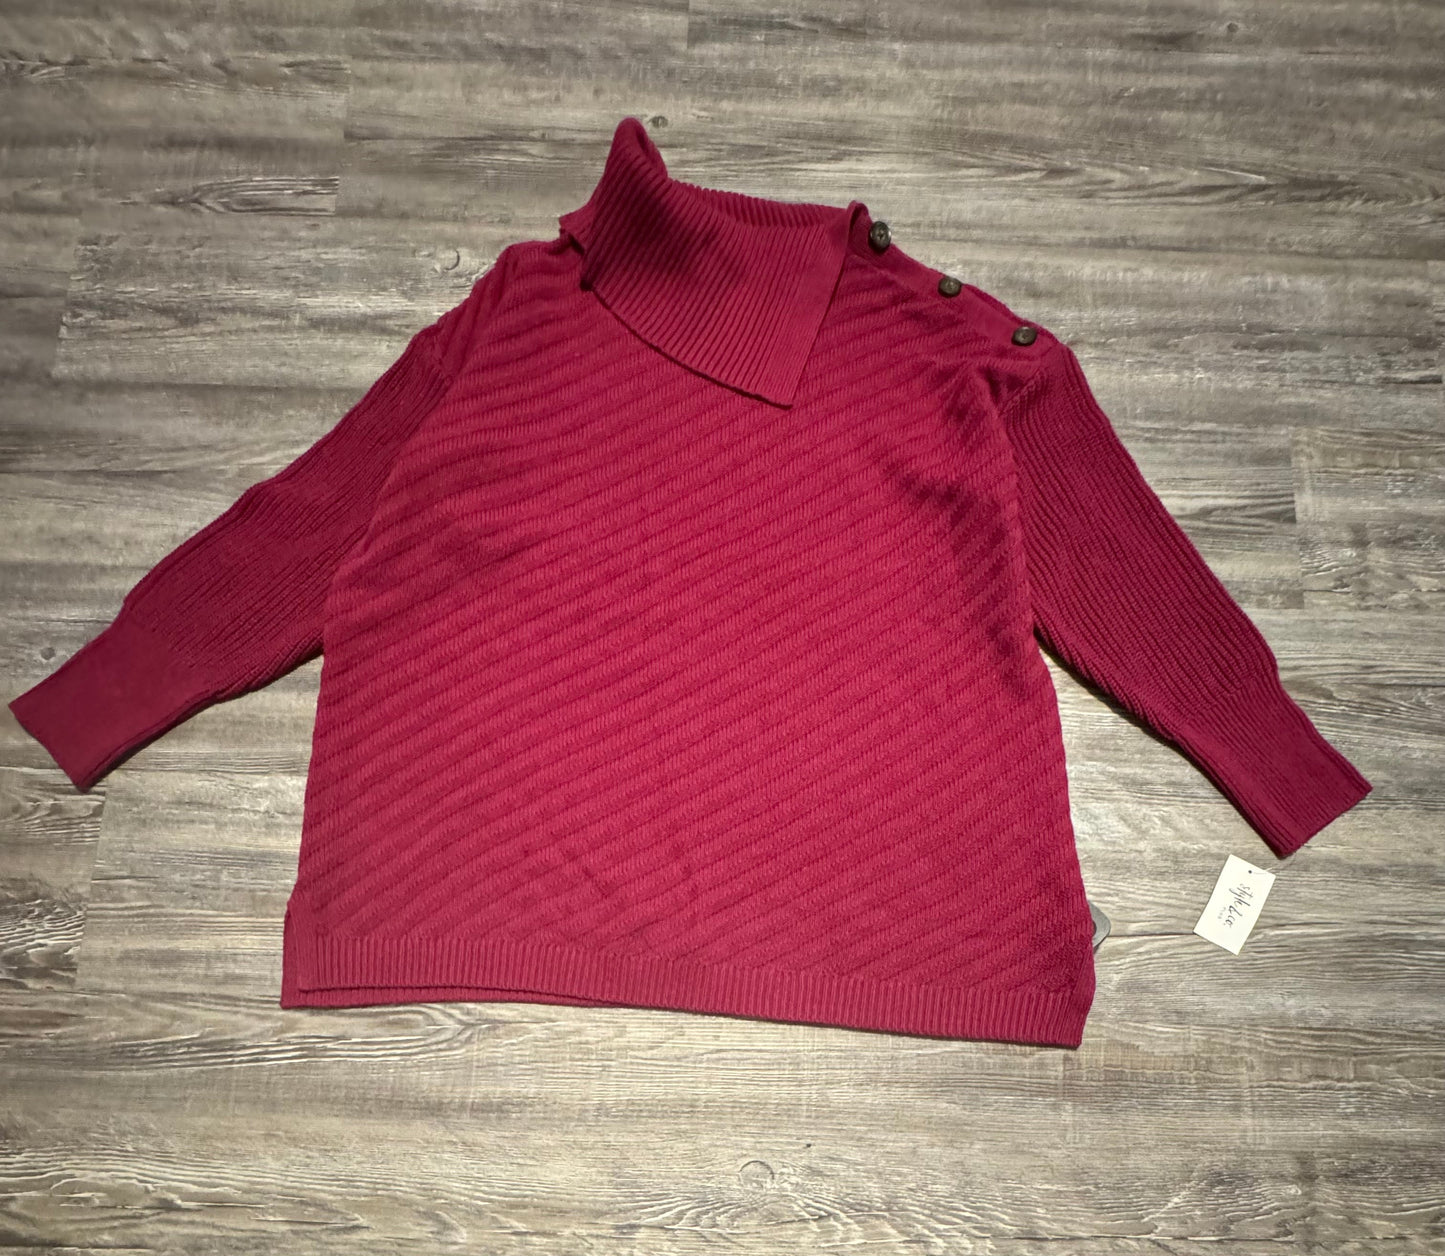 Sweater By Style And Company  Size: 1x